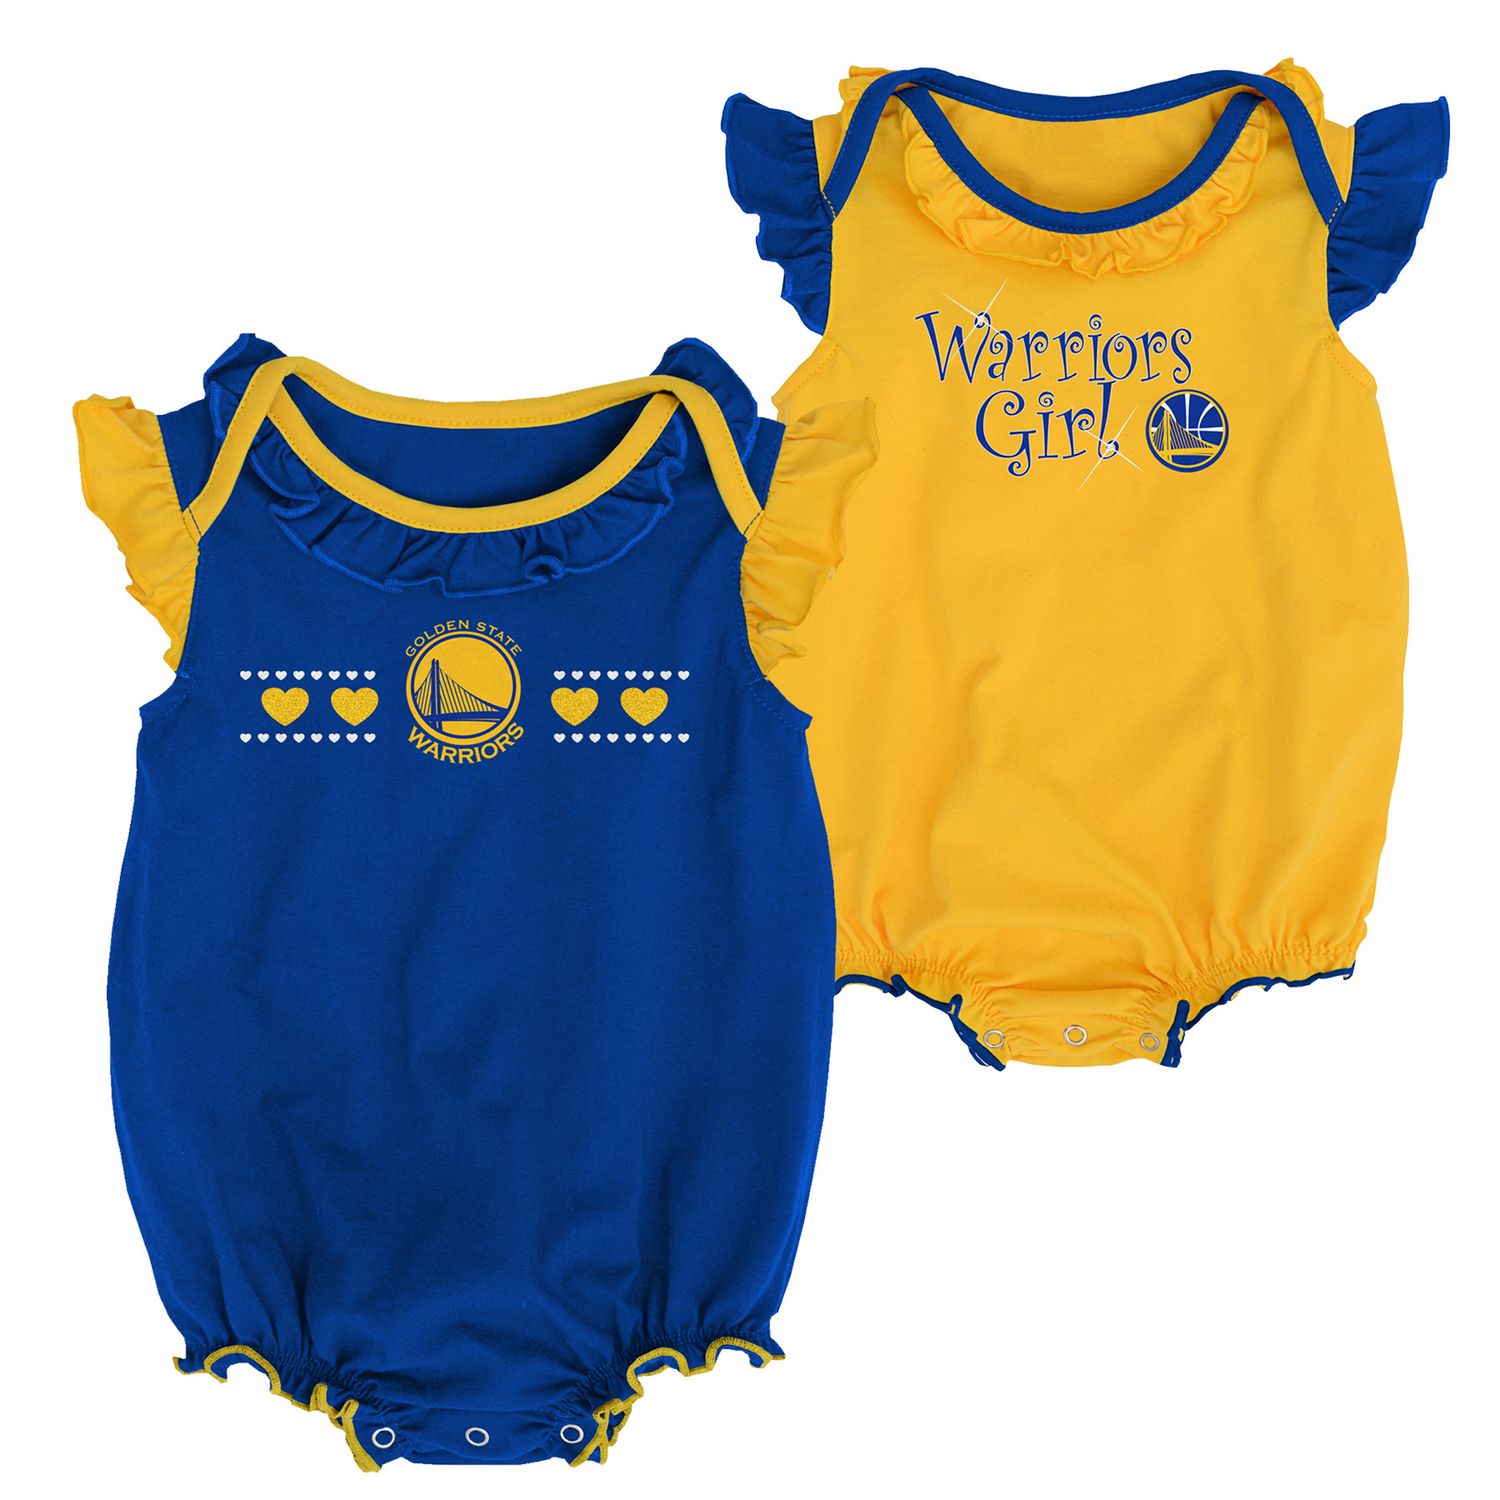 golden state warriors baby girl clothes